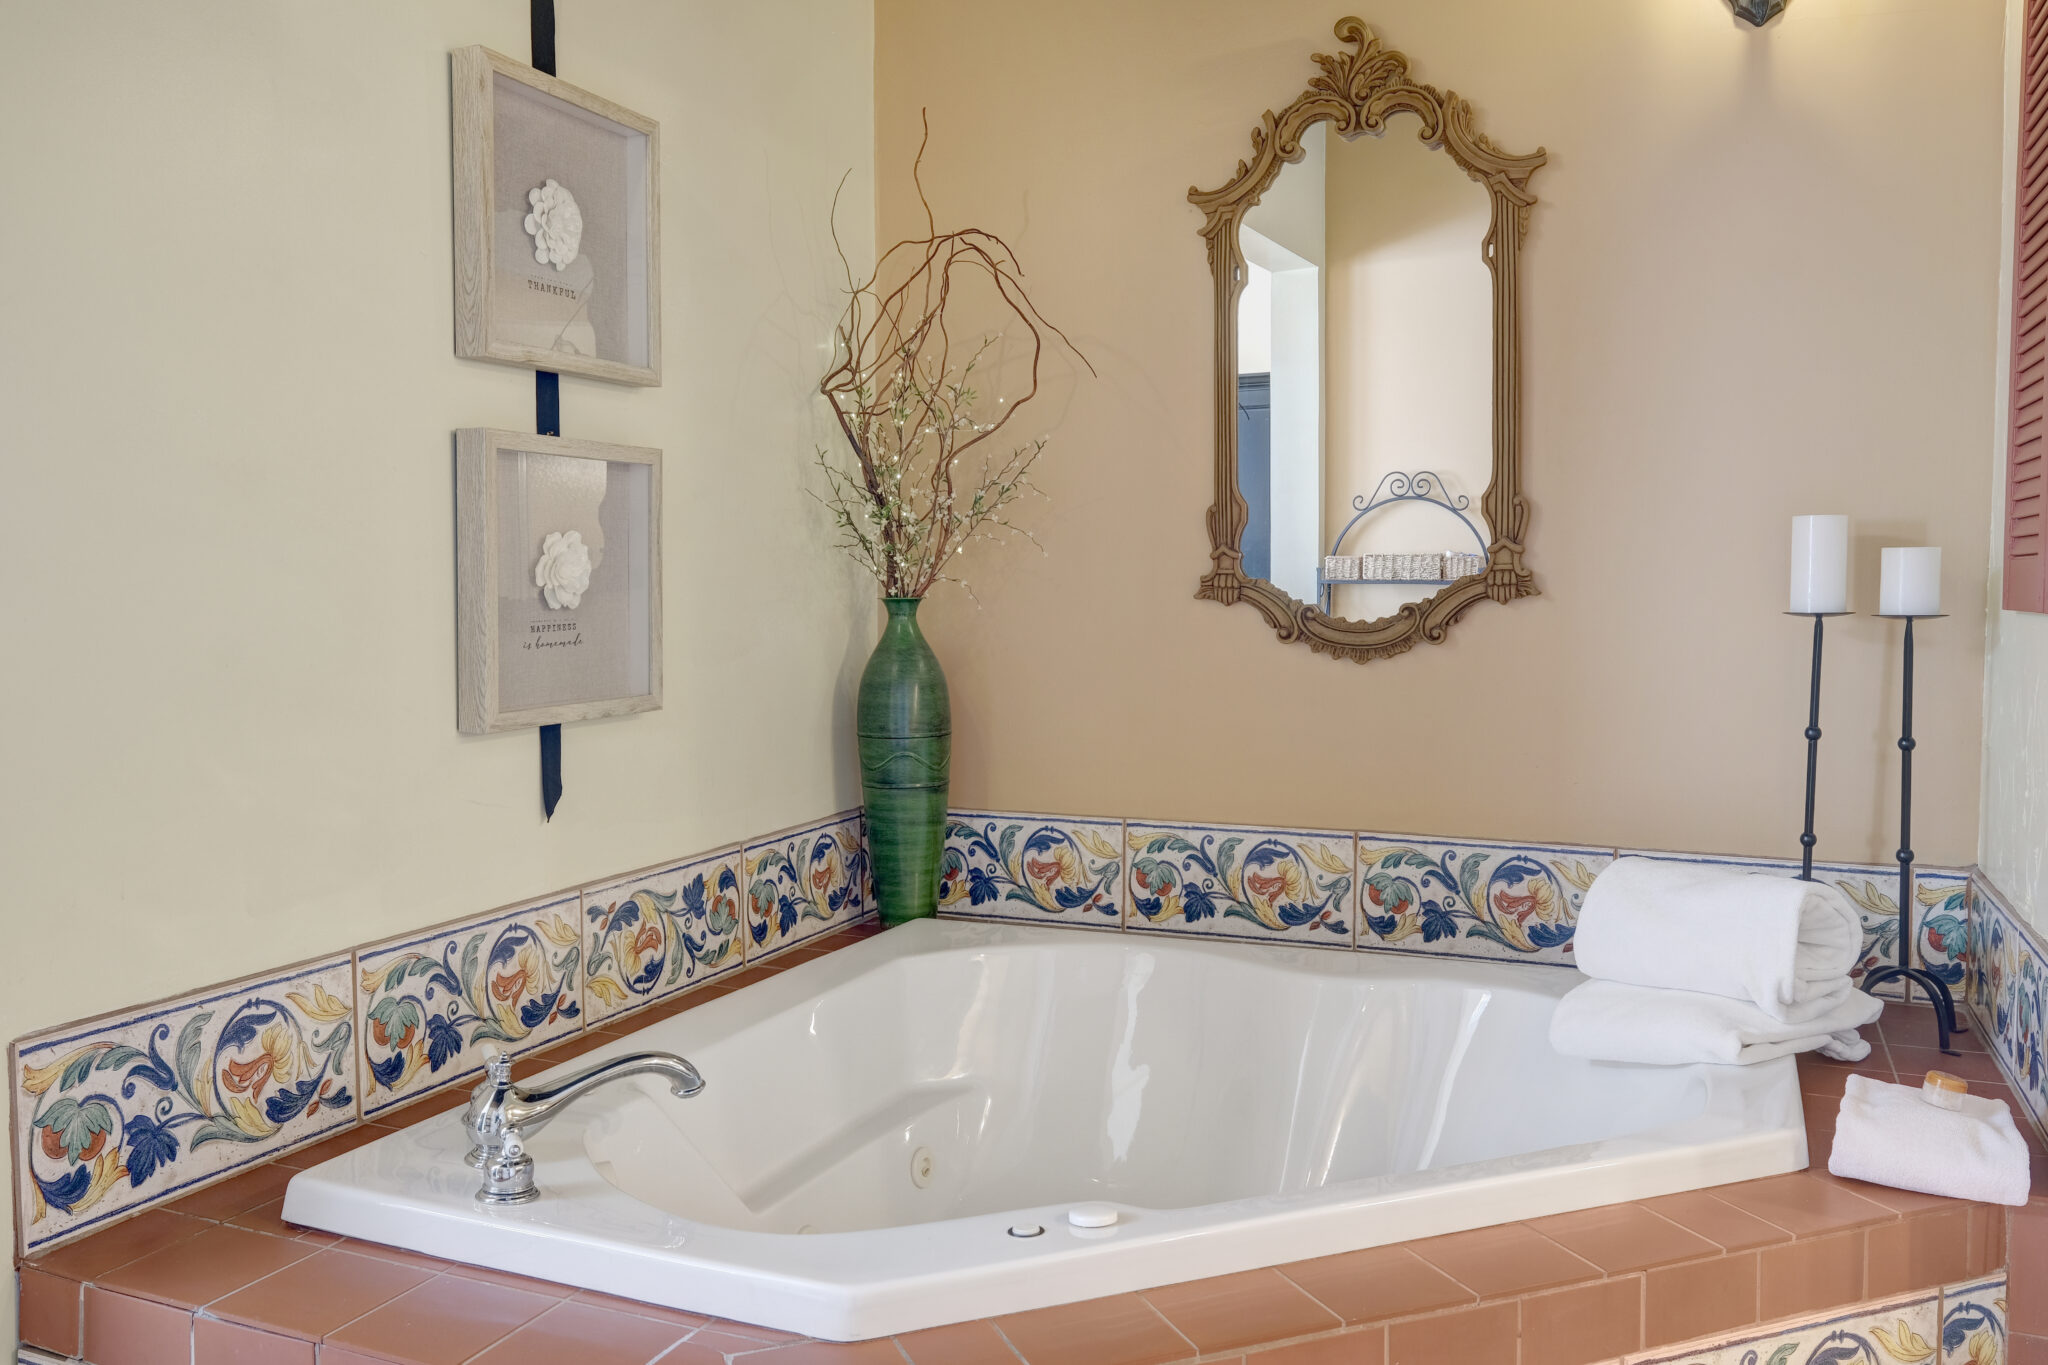 Two person whirlpool tub with a terracotta roof feature.